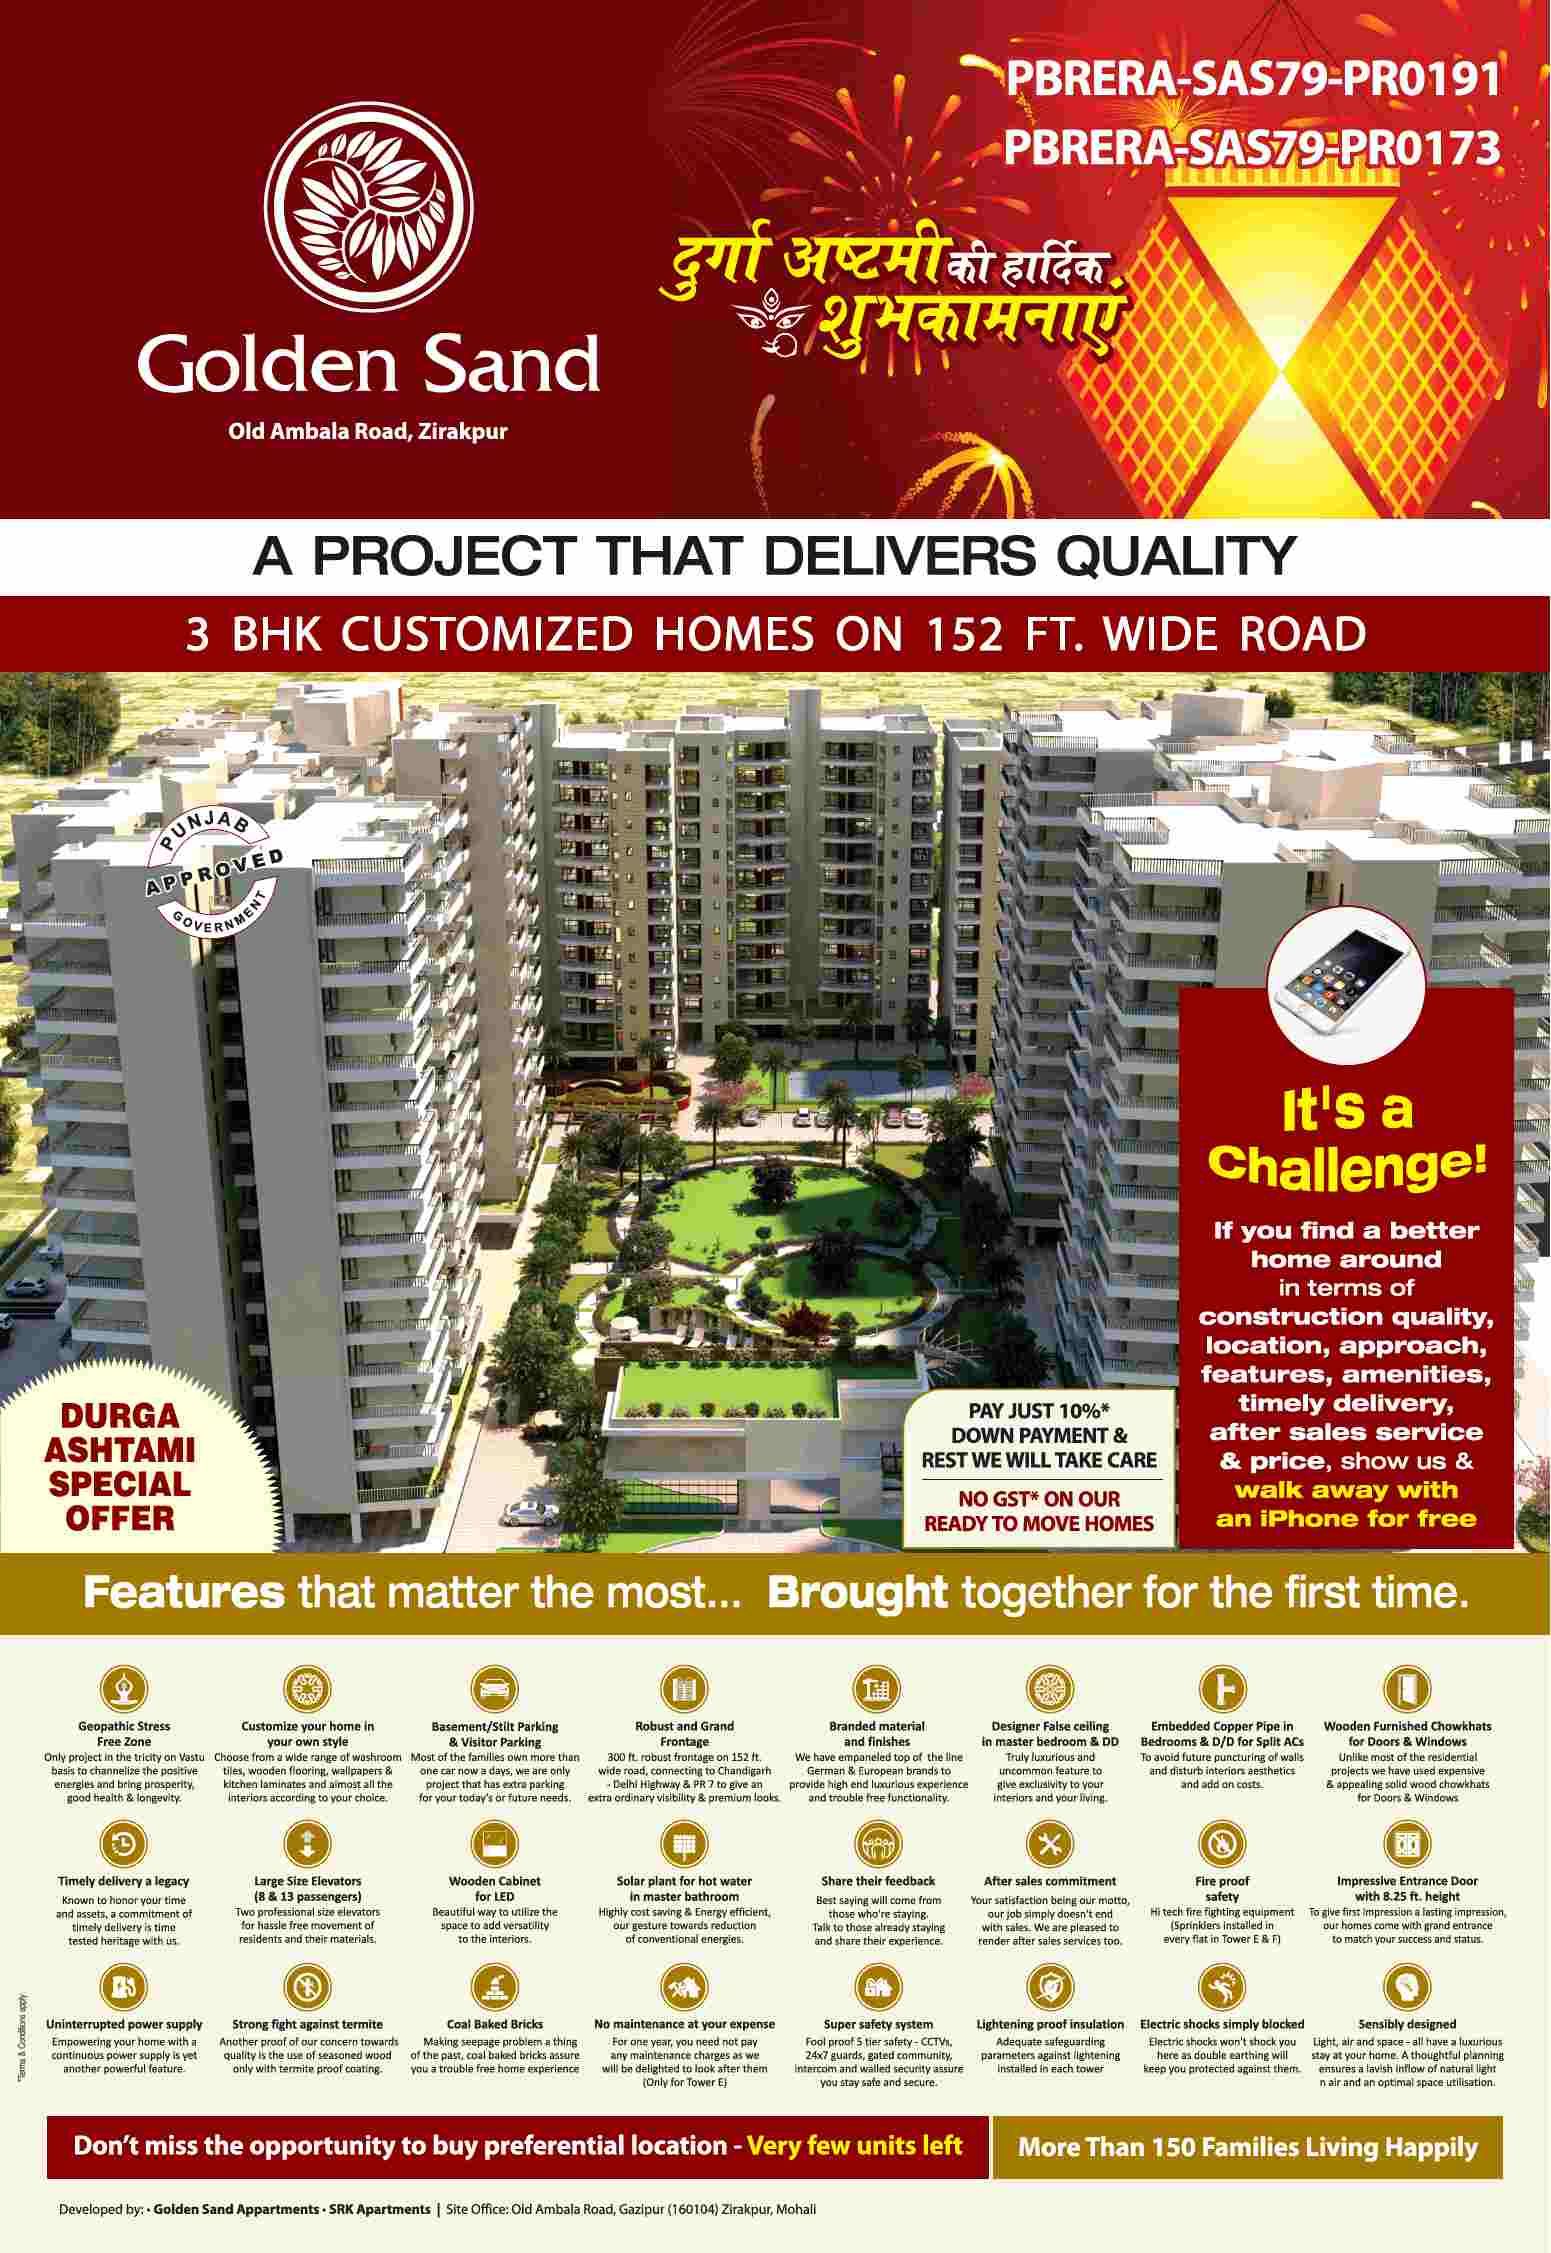 Pay just 10% down payment and book your home at Golden Sand Apartments in Chandigarh